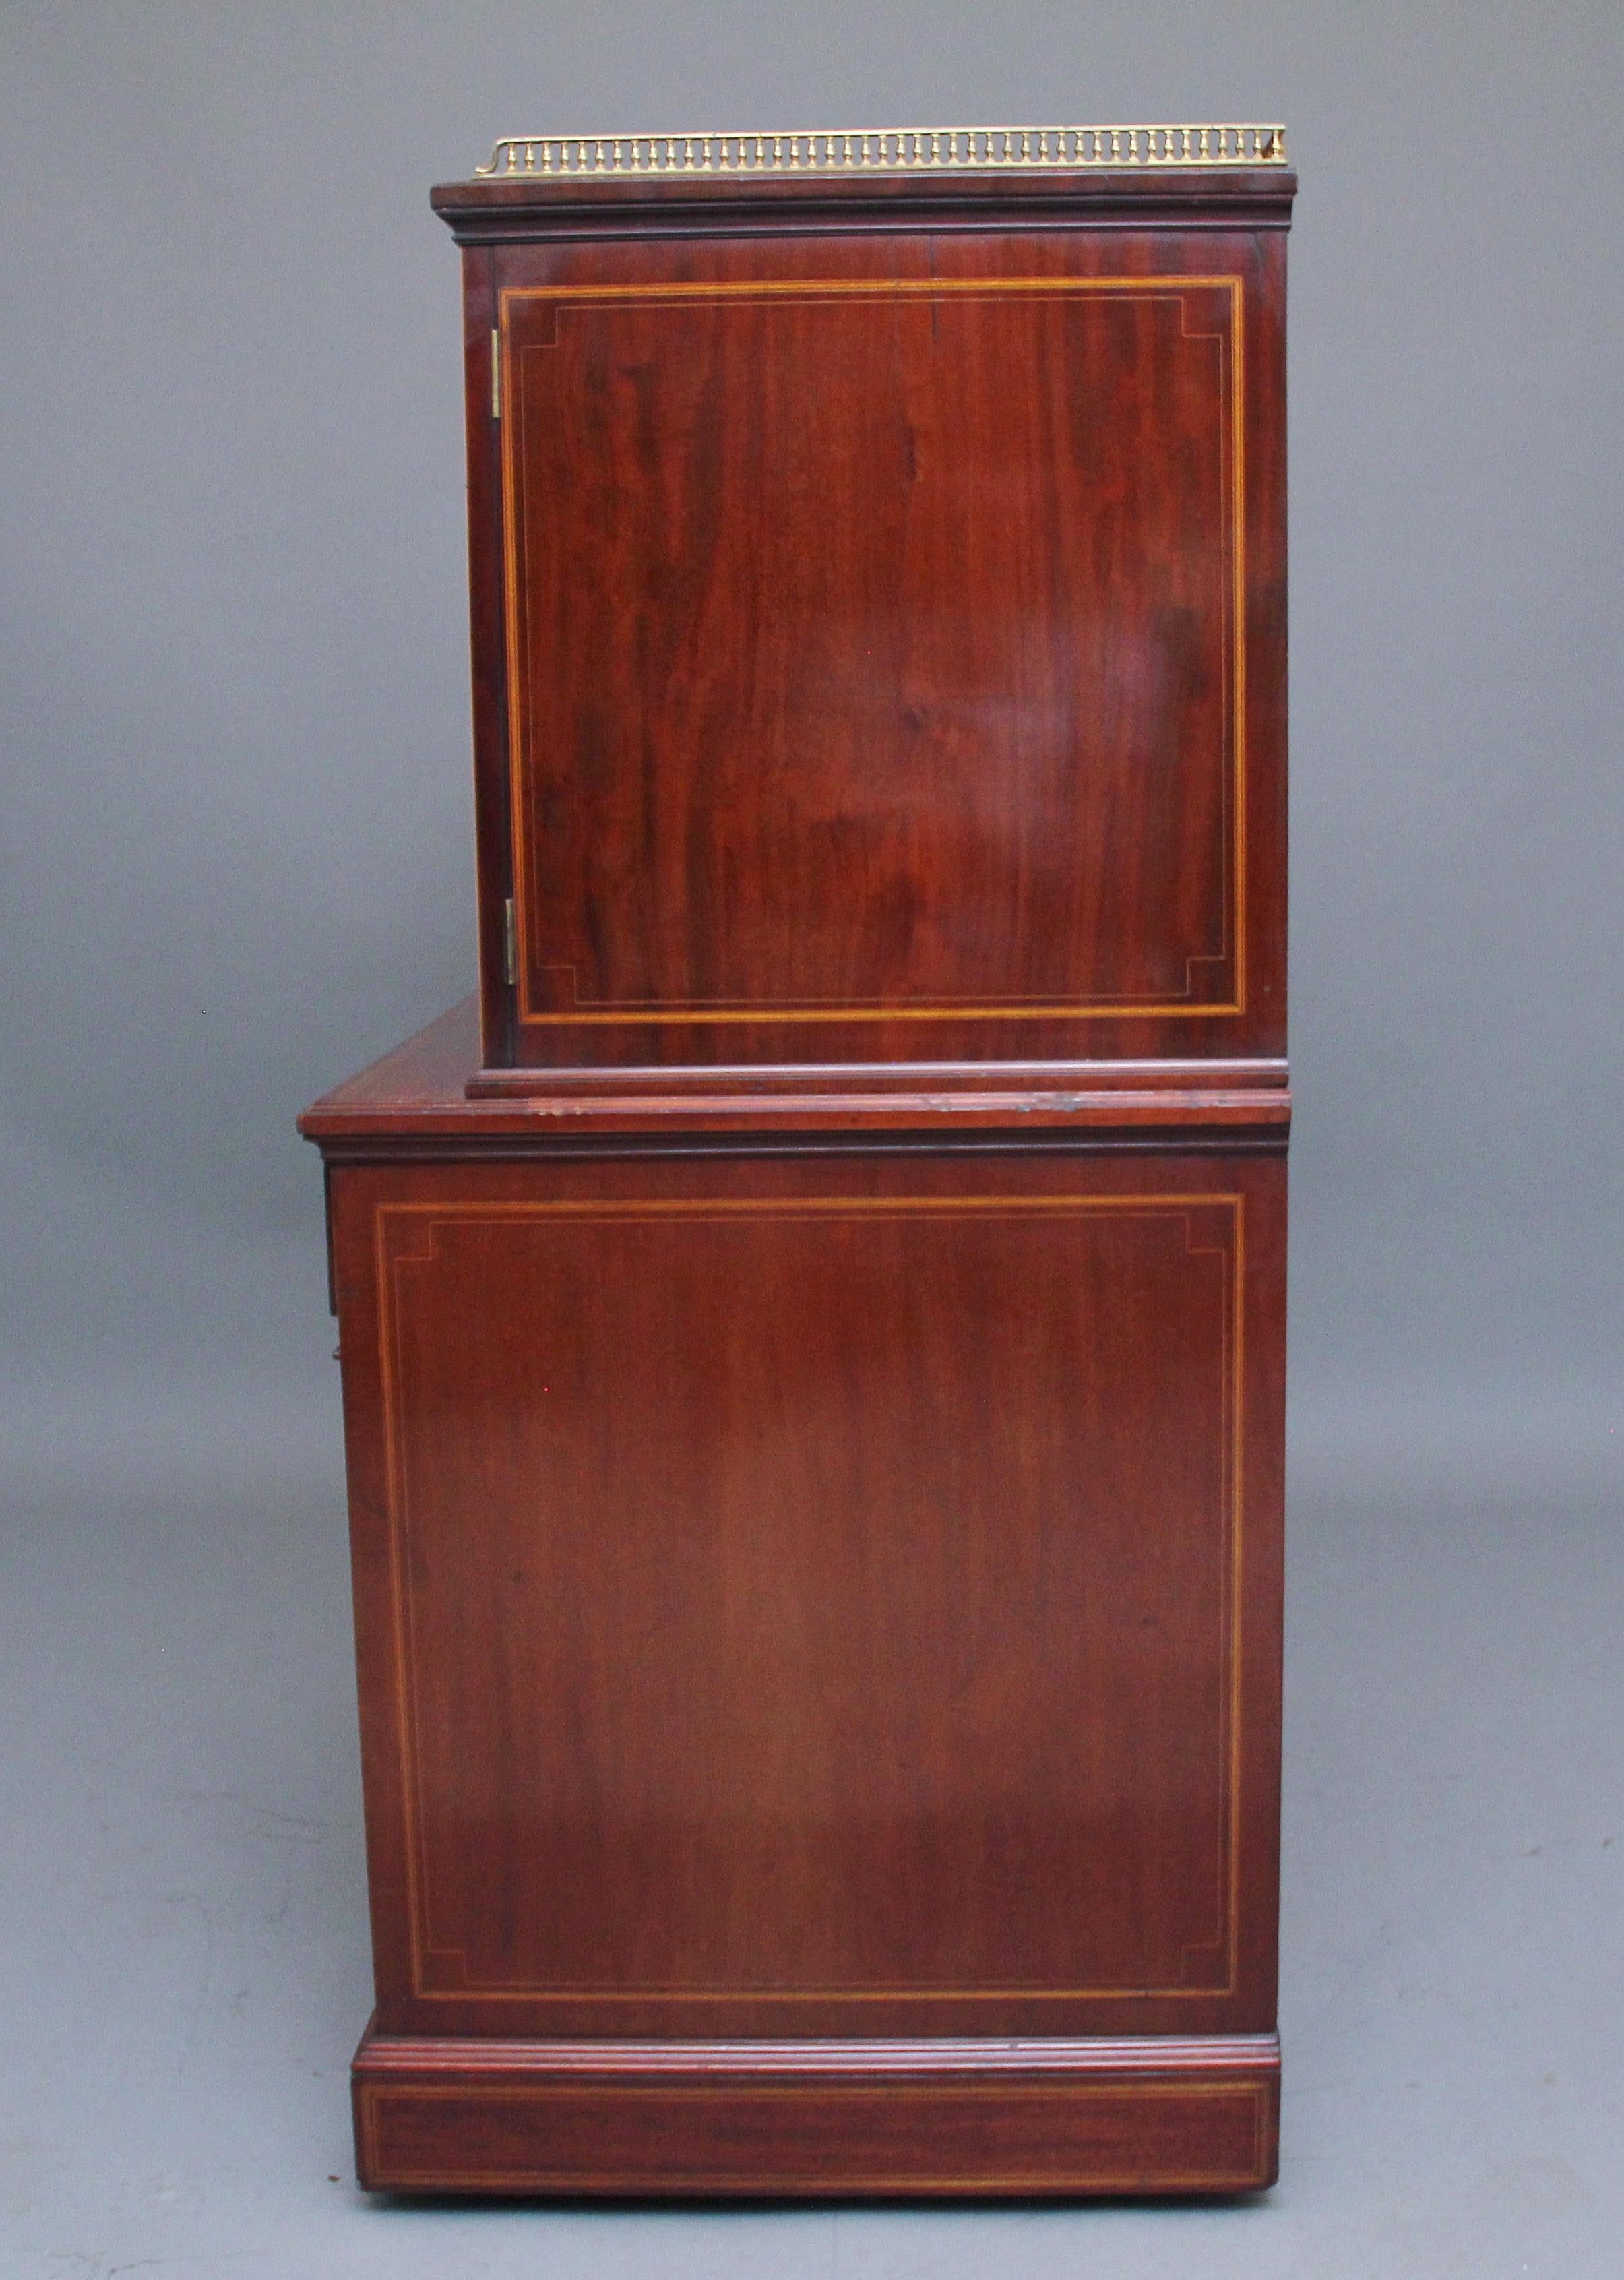 Superb Quality 19th Century Mahogany Secretaire Desk Cabinet In Good Condition For Sale In Martlesham, GB